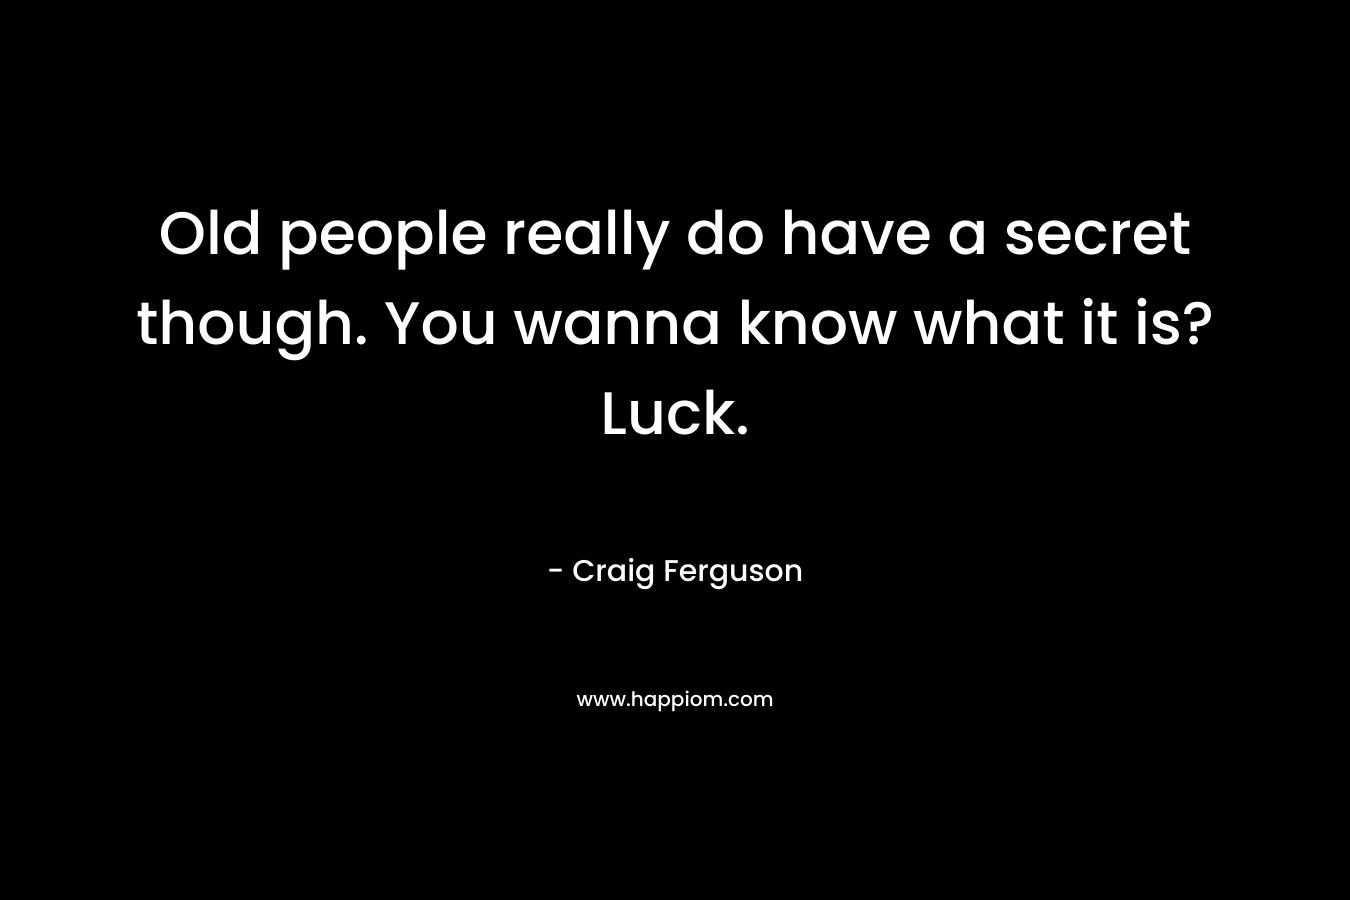 Old people really do have a secret though. You wanna know what it is? Luck. – Craig Ferguson